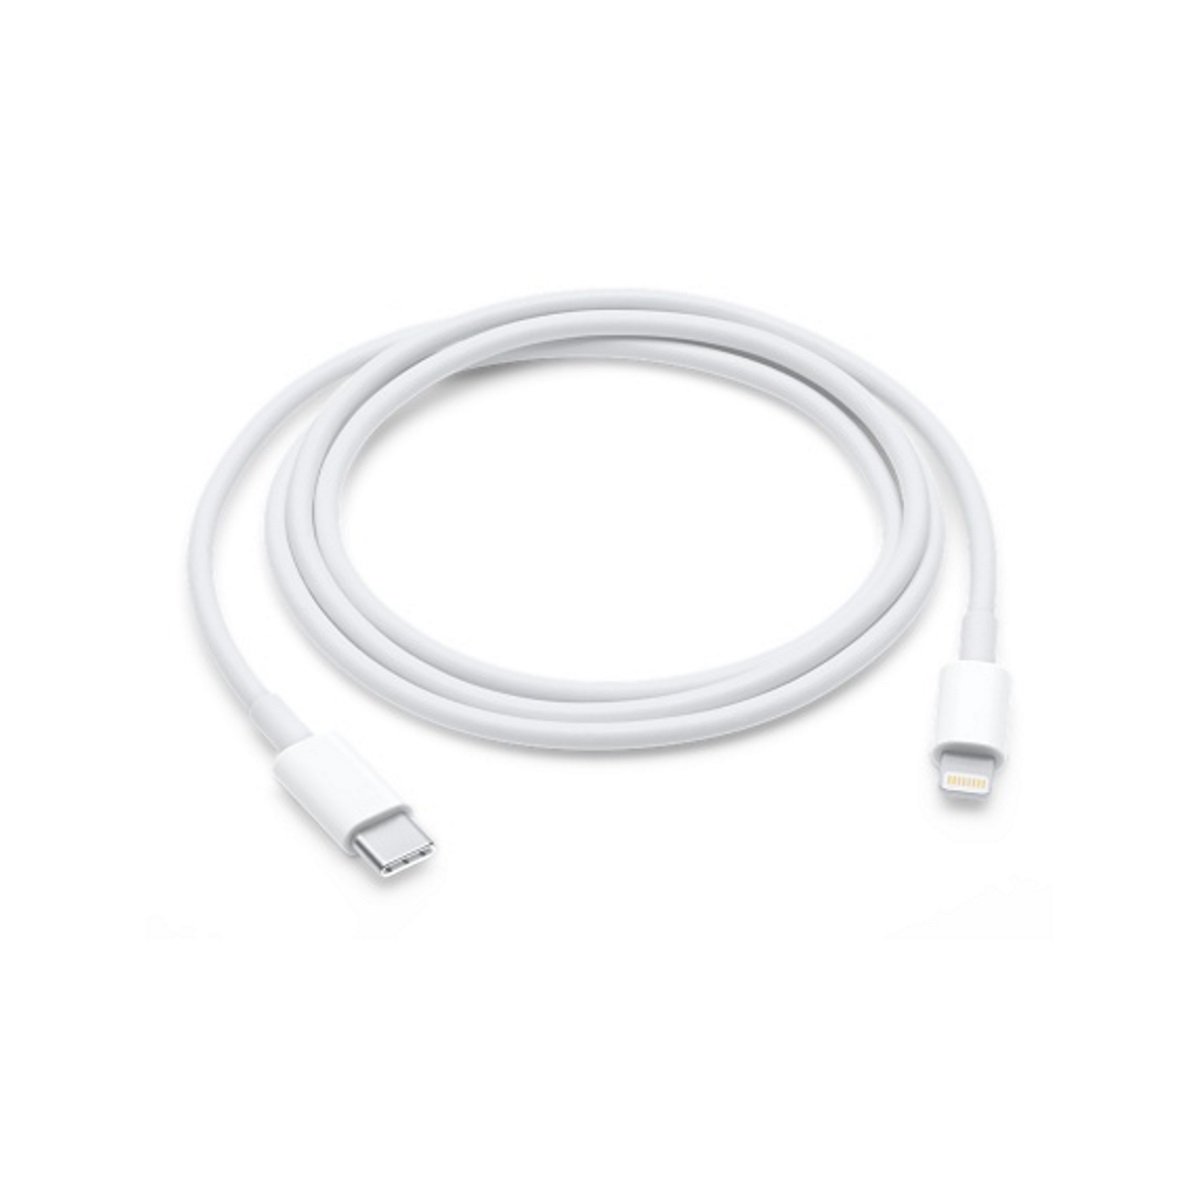 Cable Lightning a Usb - C 1 M